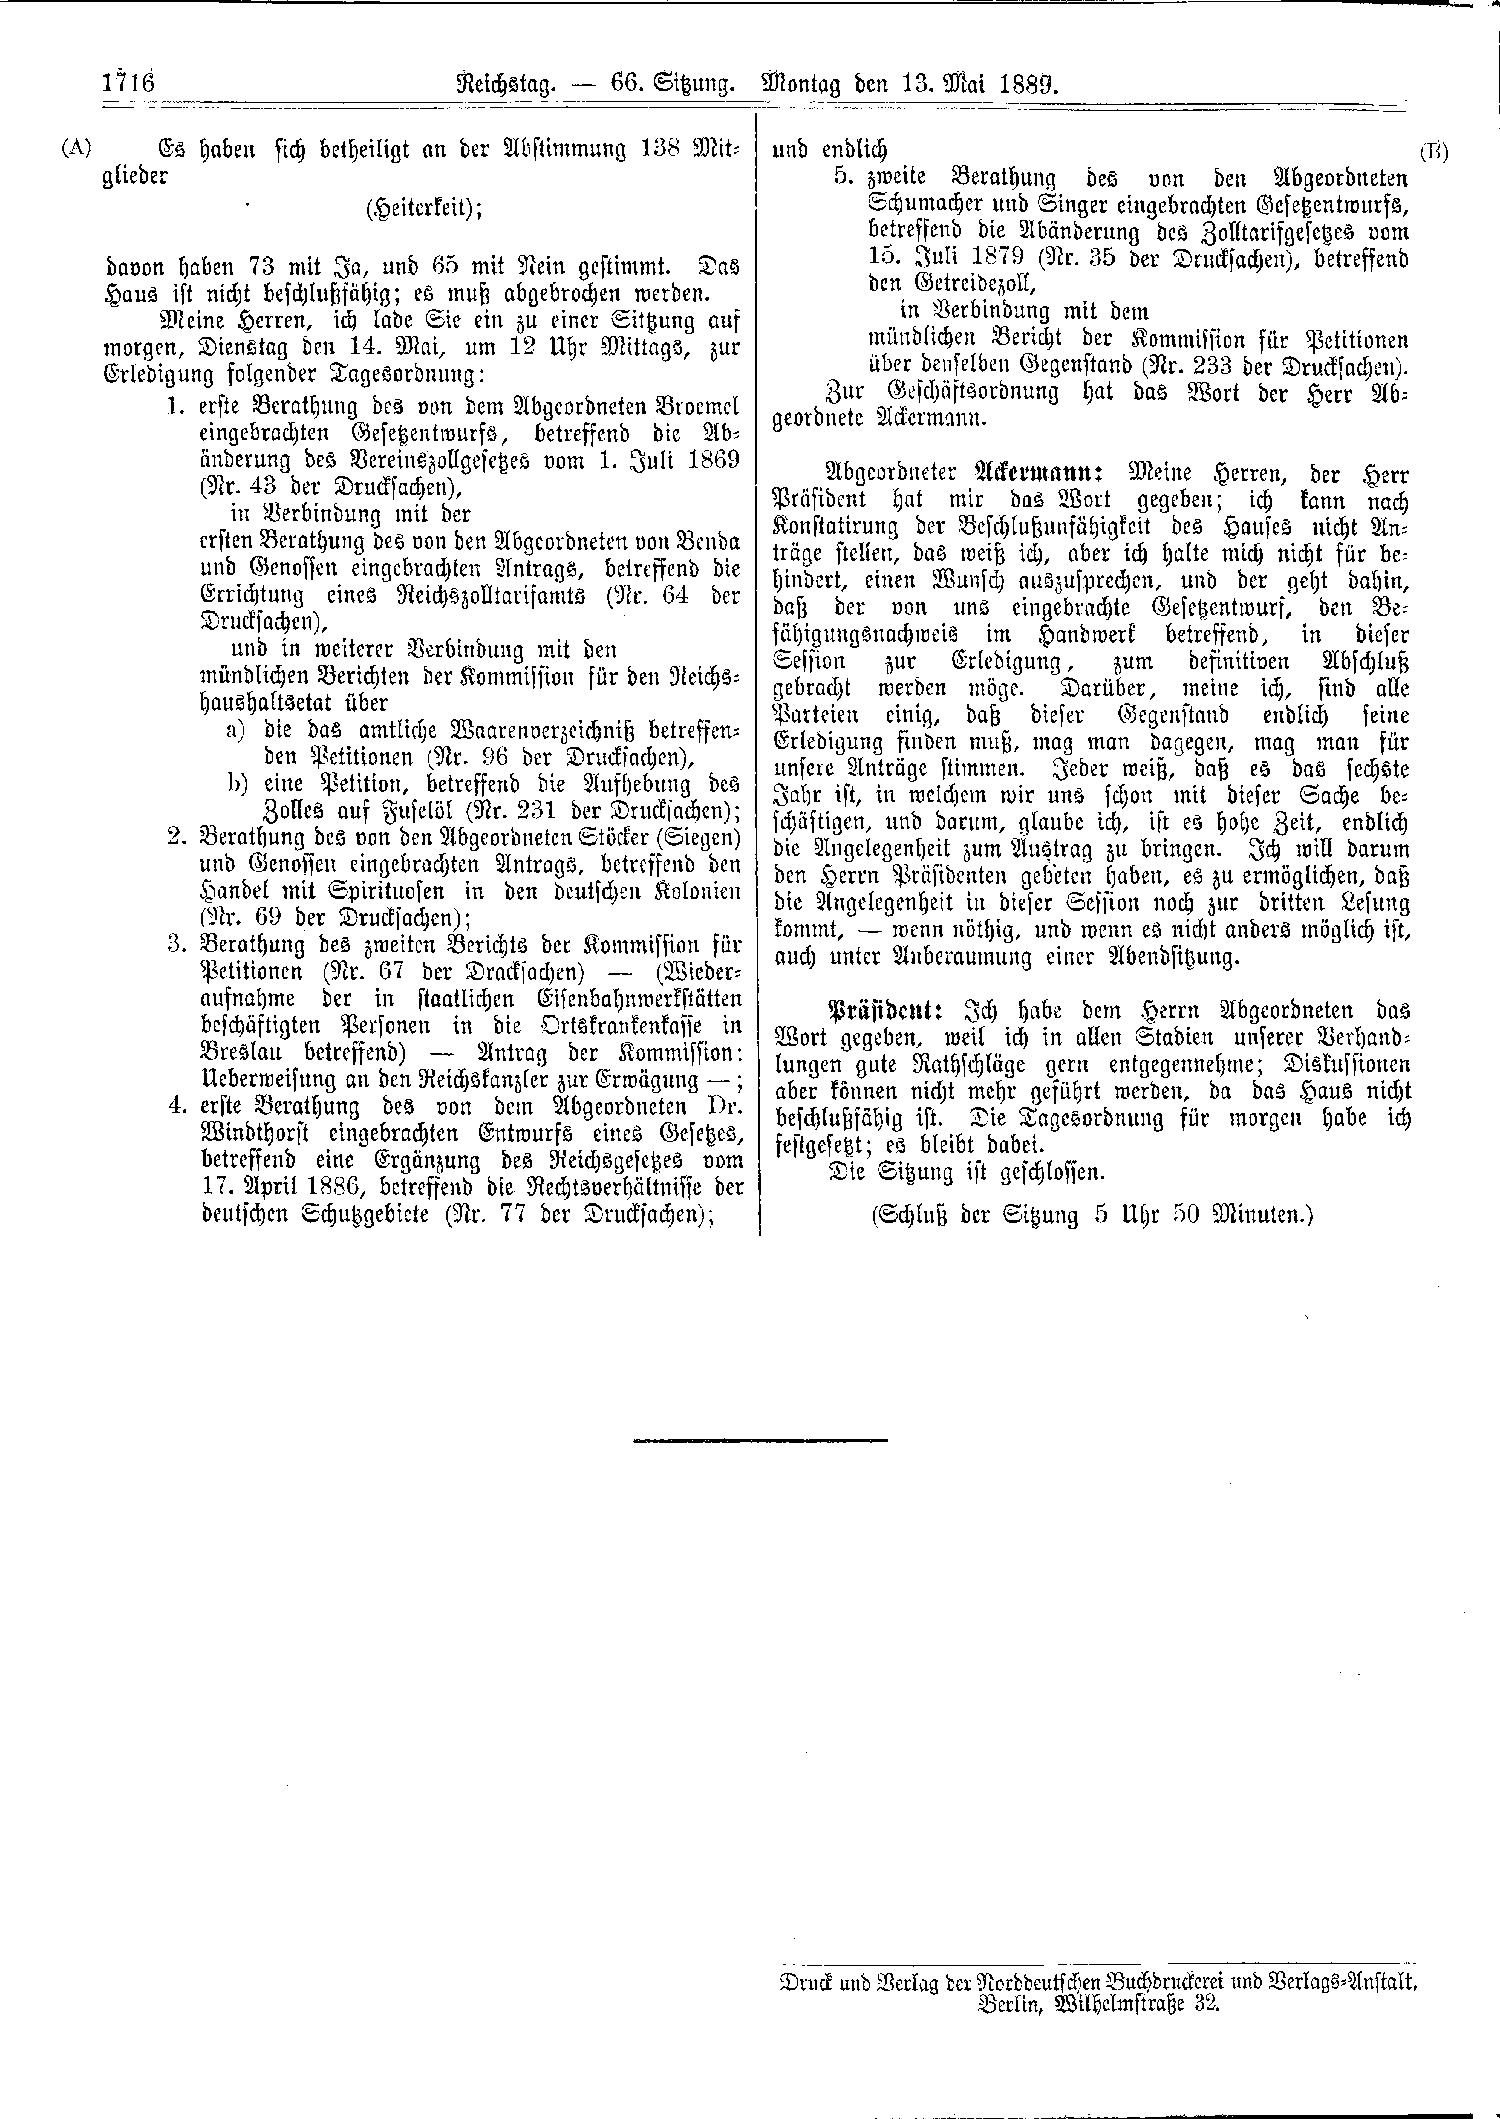 Scan of page 1716